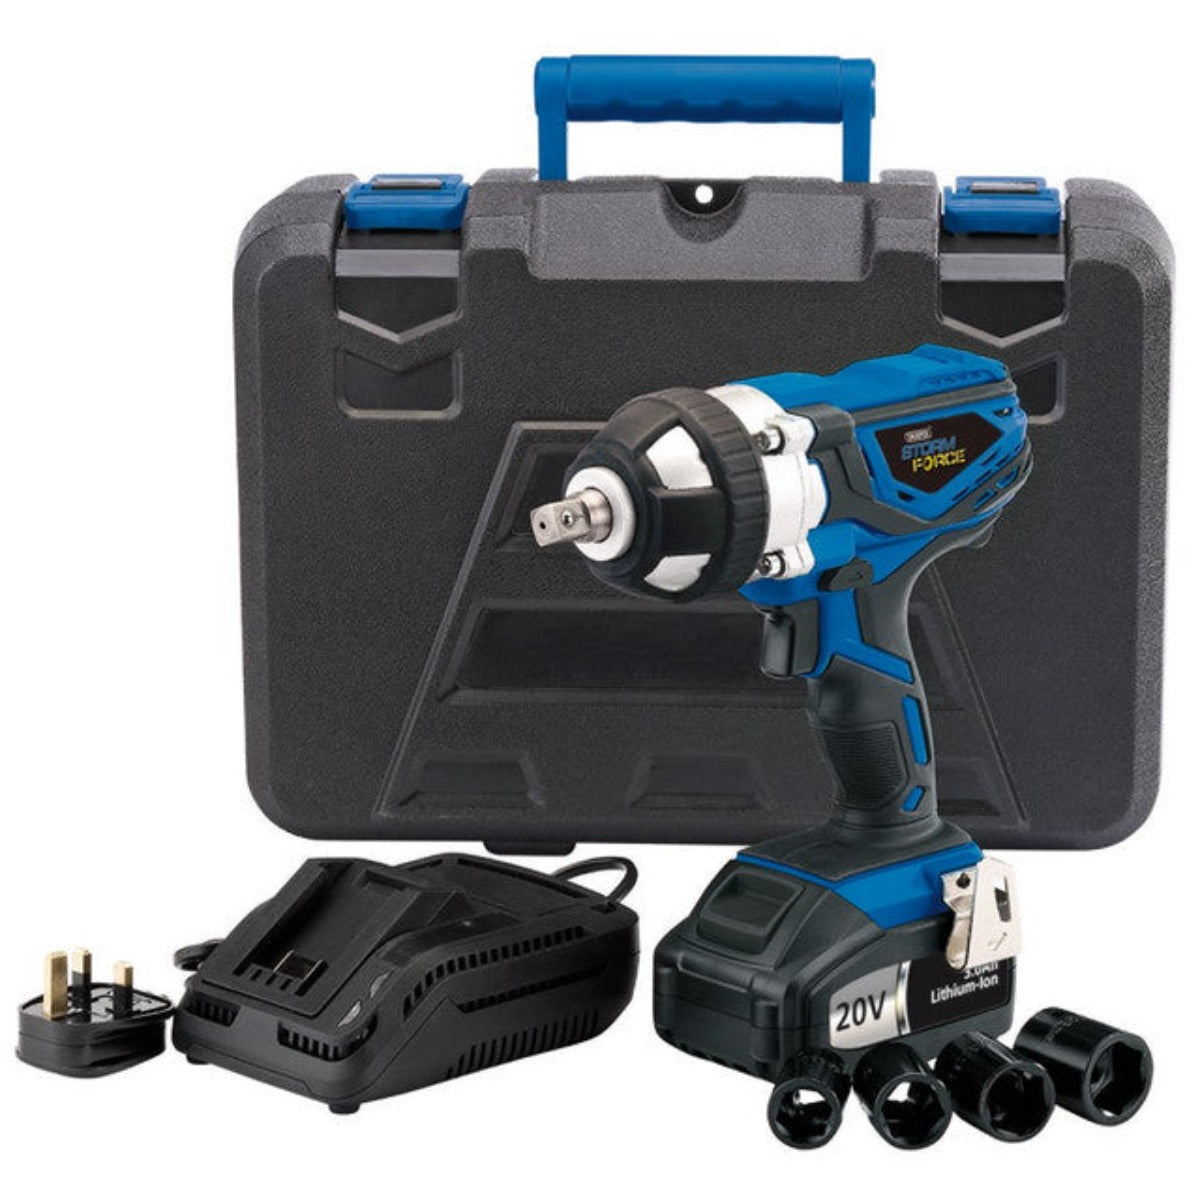 DRAPER Storm Force 20V 1/2" Cordless Impact Wrench & 2 x 3Ah Batteries & Charger